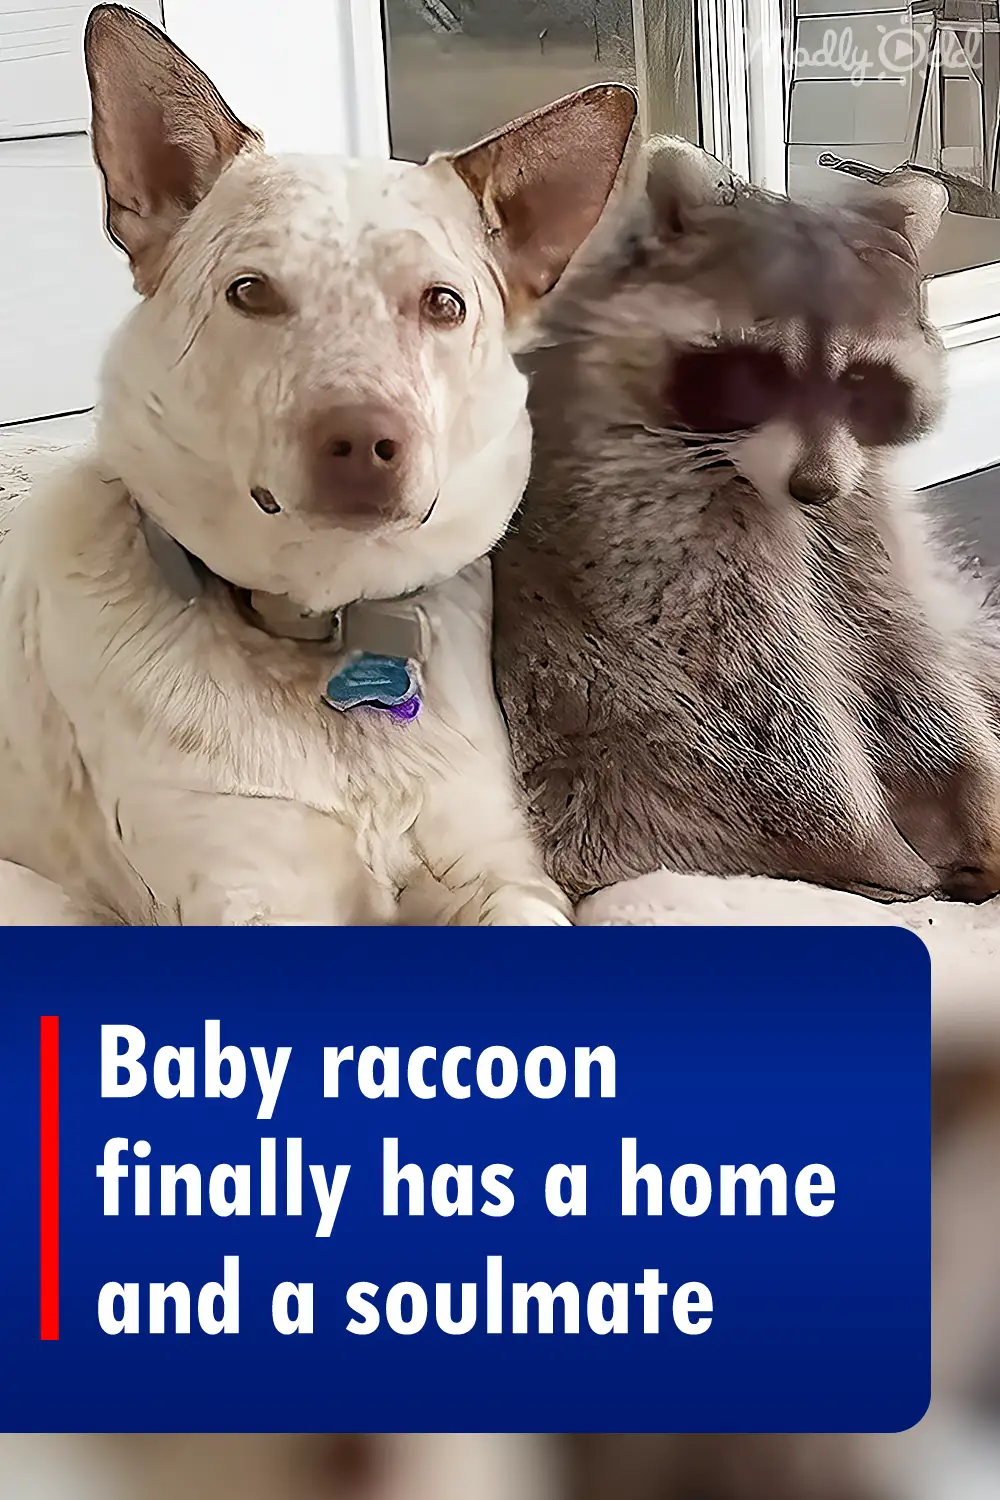 Baby raccoon finally has a home and a soulmate